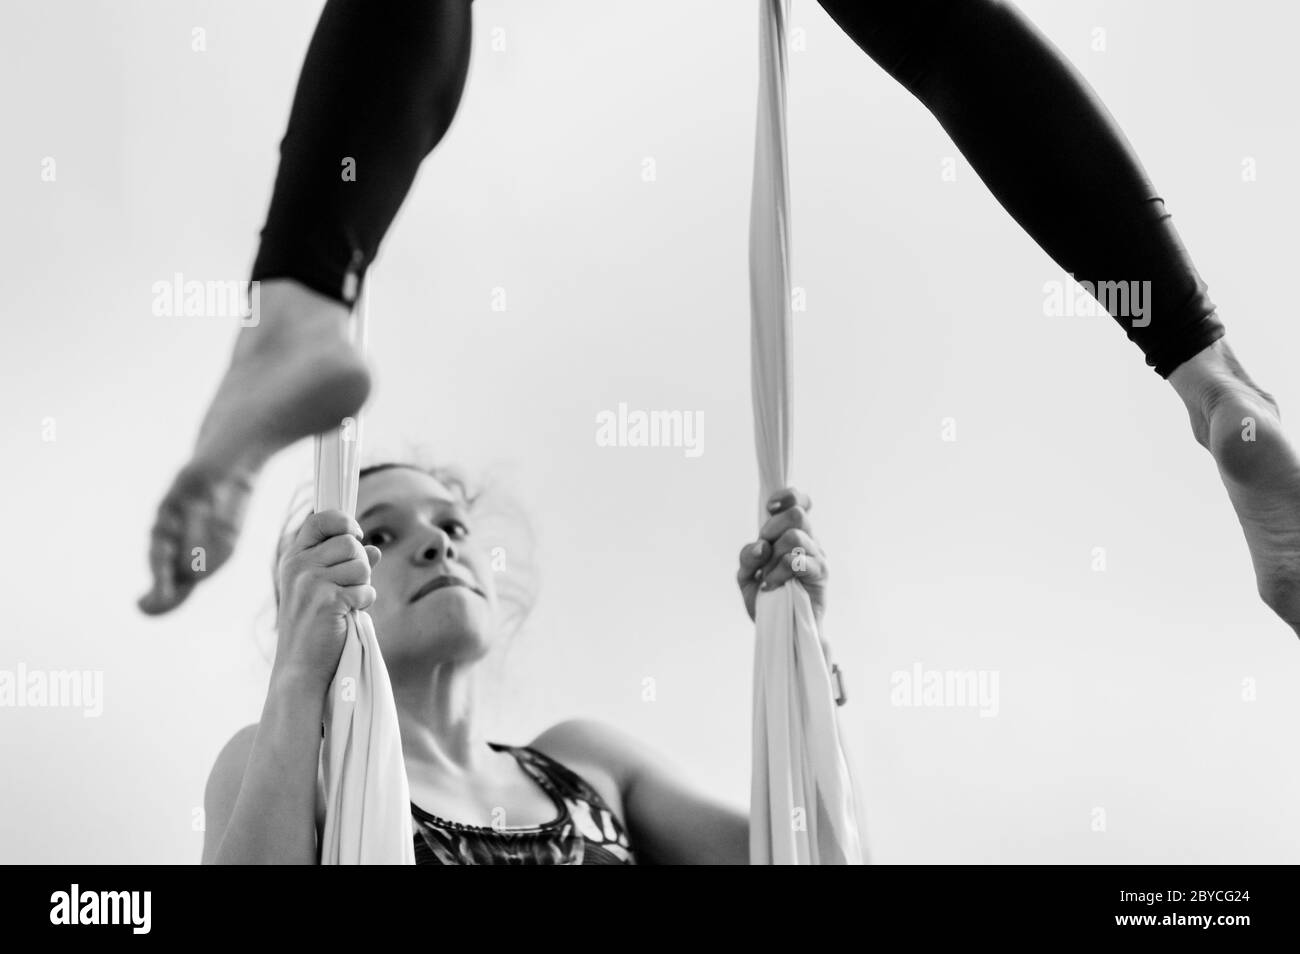 A Colombian aerial dancer holds aerial silks during a training session in a gym in Medellín, Colombia. Stock Photo